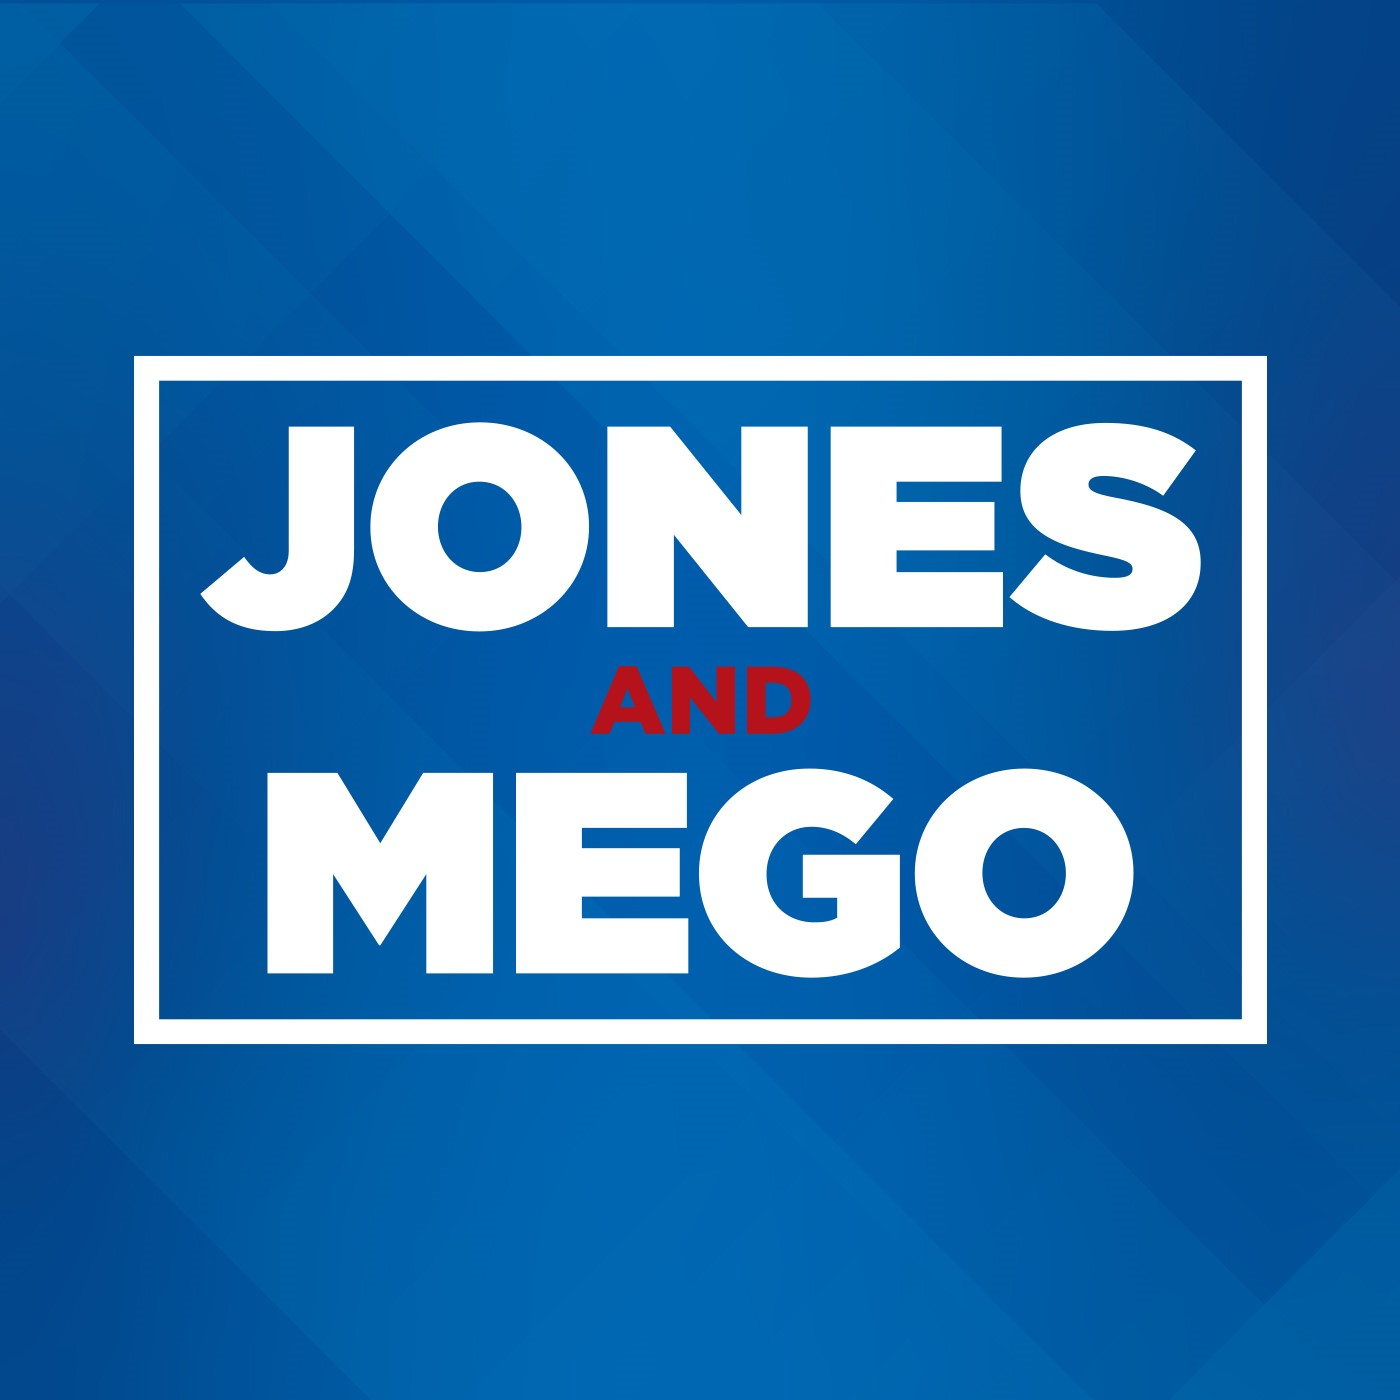 Patriots preseason game suspended - Jones and Mego discuss the future of joint practices